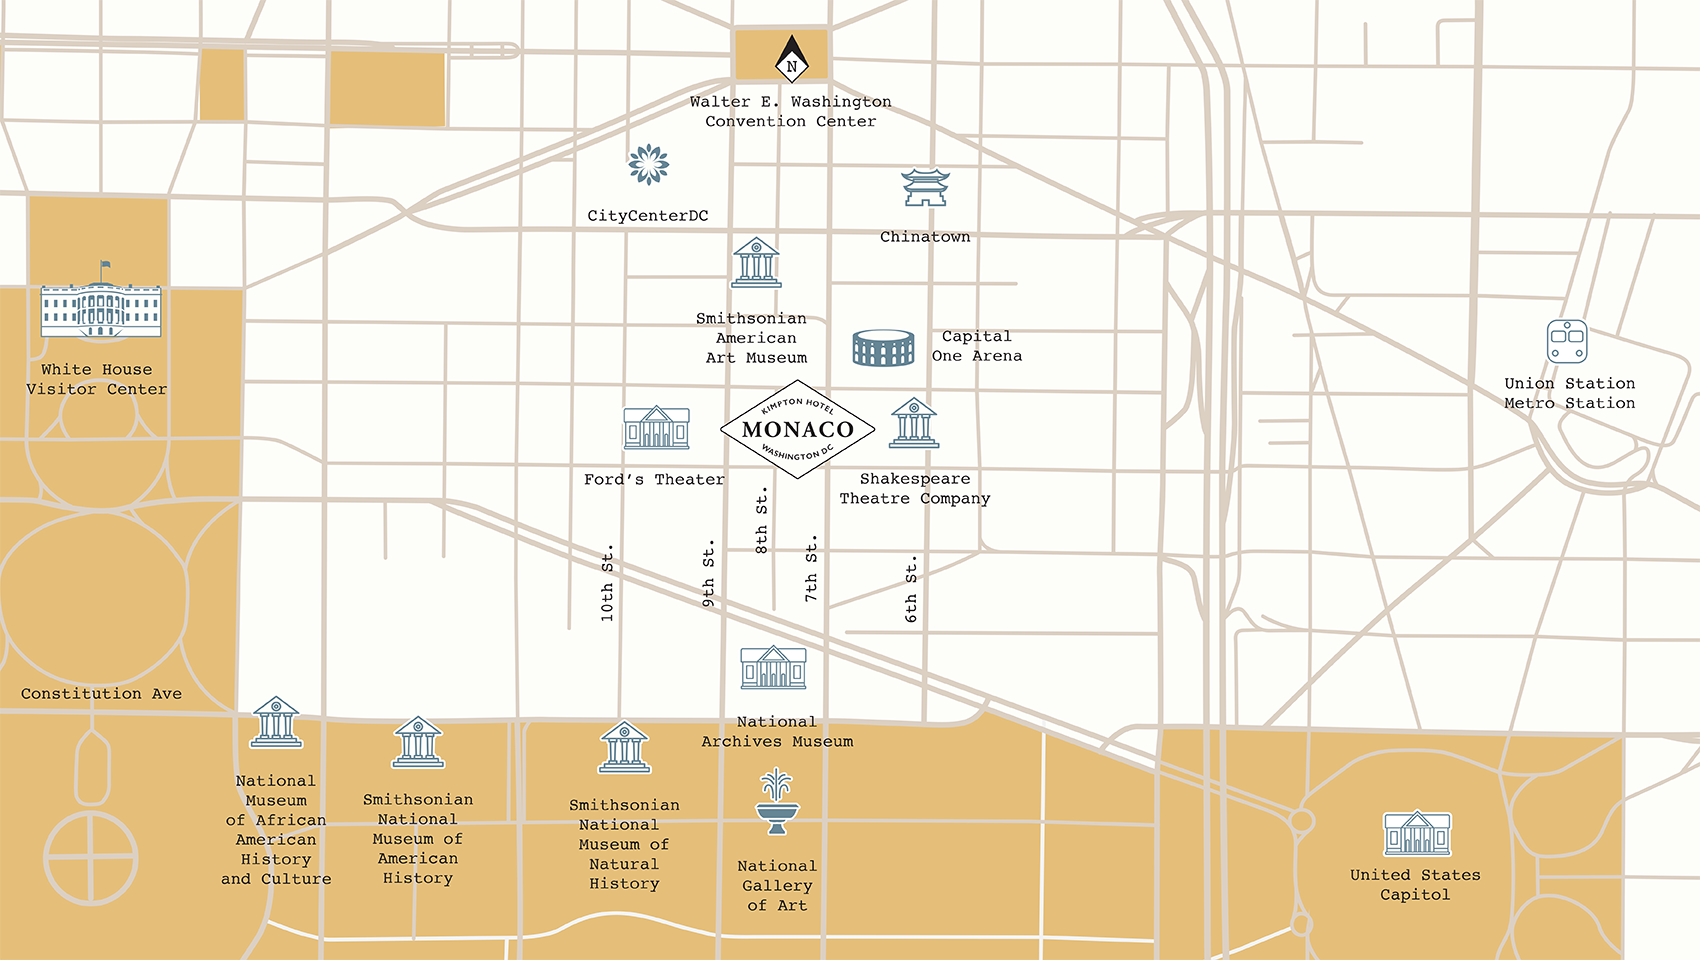 Capital One Arena Maps and Directions: Washington DC